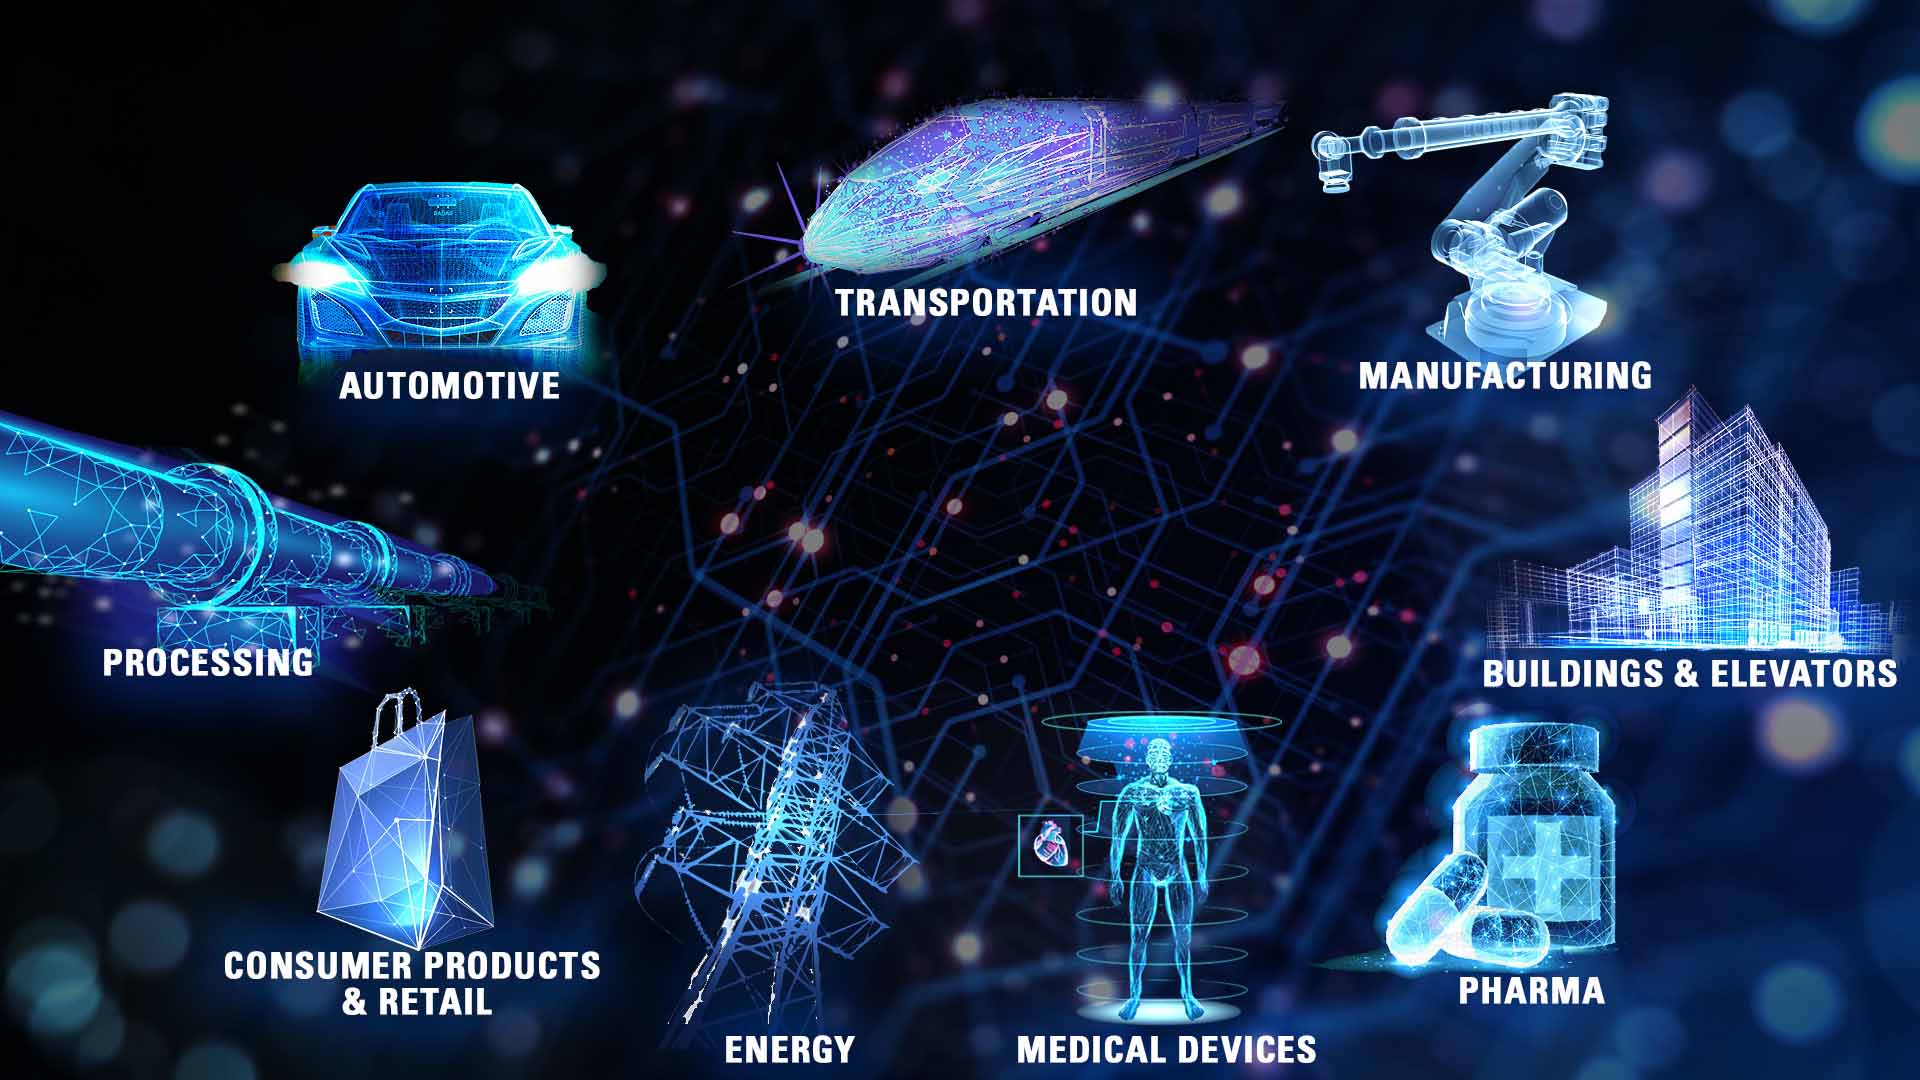 TÜV SÜD’s scope of cyber security activities: automotive, transportation, manufacturing, buildings & elevators, pharma, medical devices, energy, consumer products & retail and processing industries